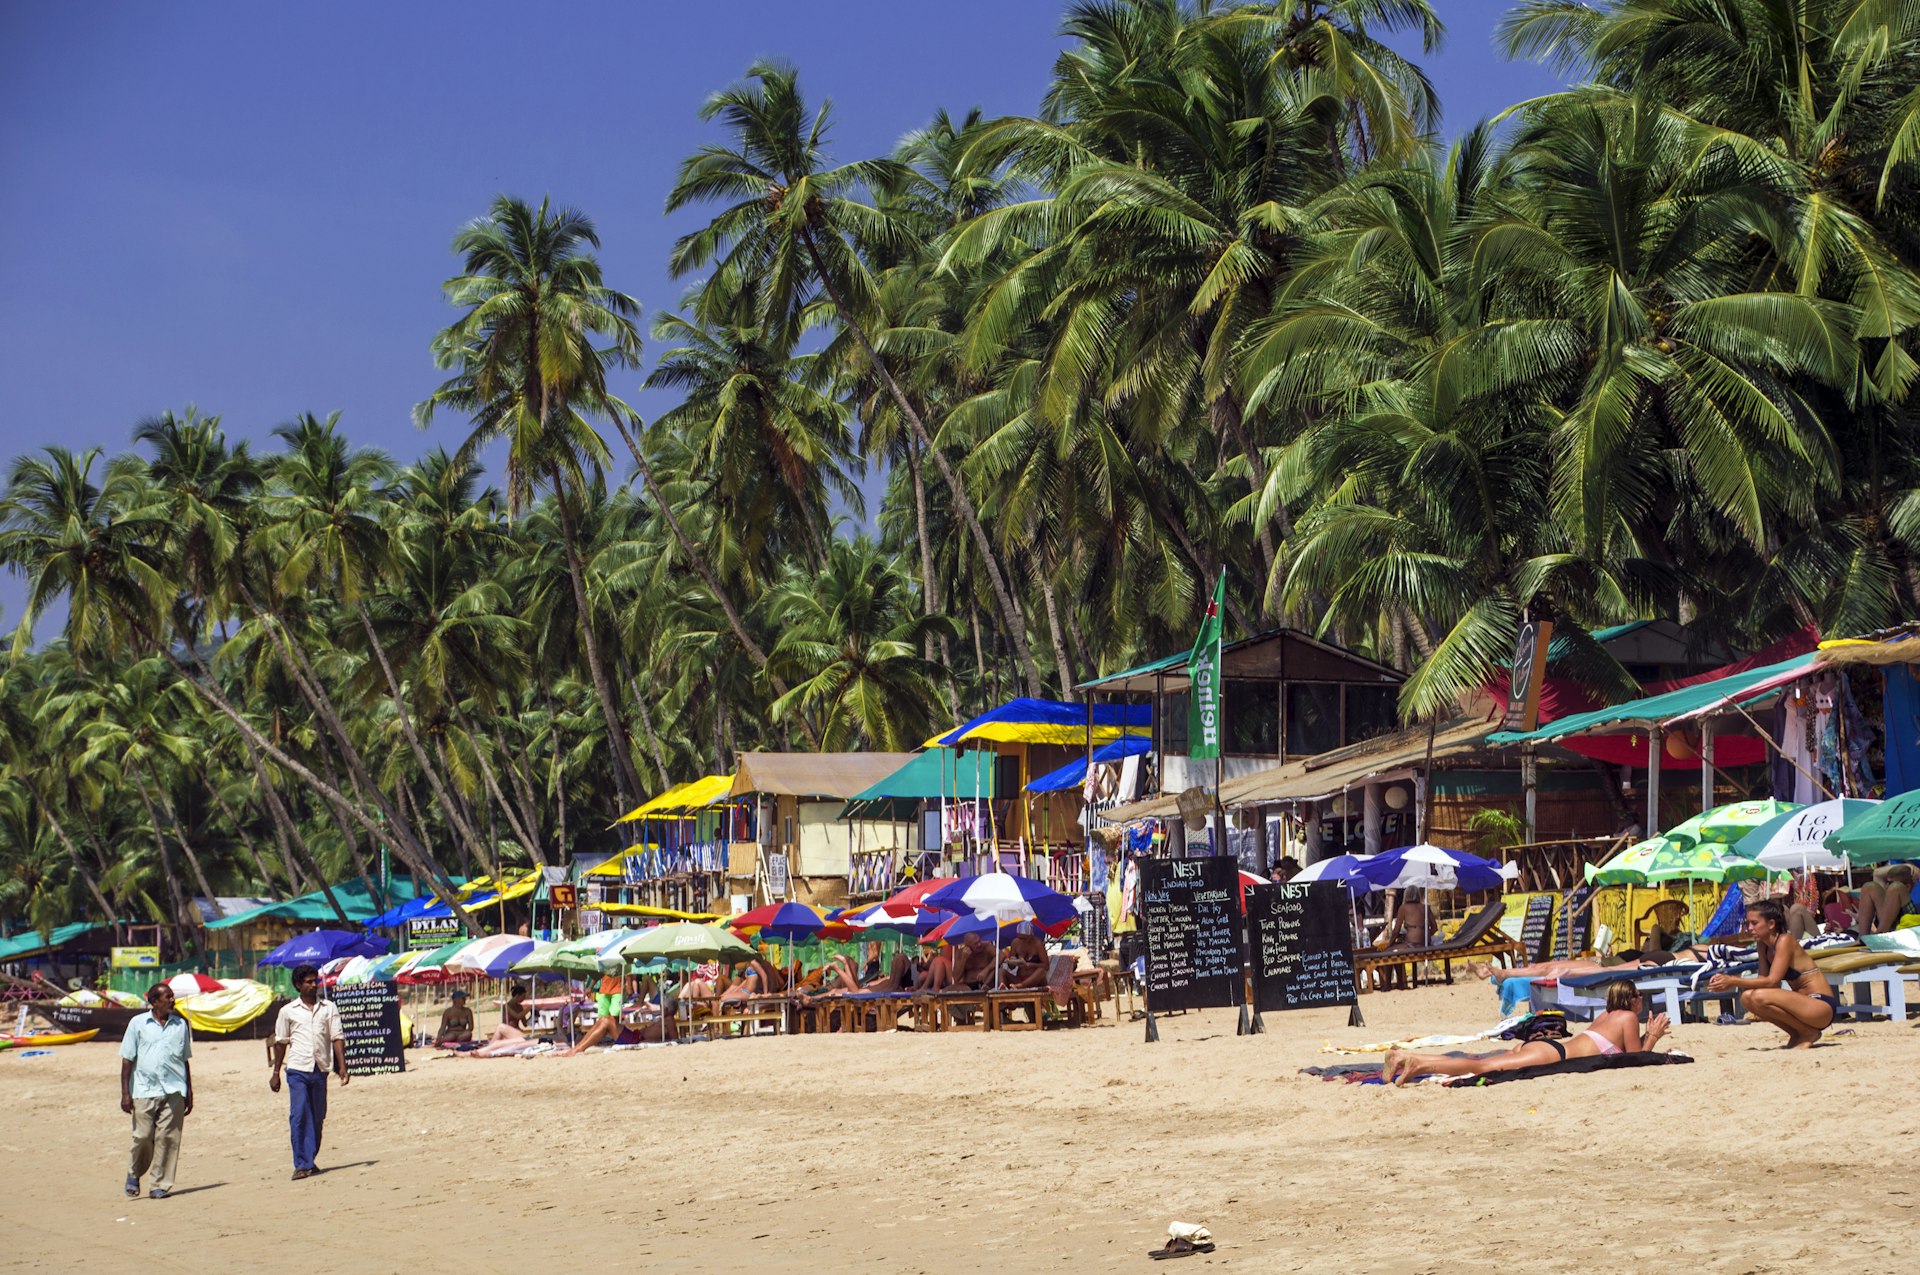 Two Indian men, one in khaki pants a light blue shirt, the other in dark blue pants and a light button-down, stroll along Palolem Beach in Goa past colorful umbrellas and sunbathing tourists. Behind the row of umbrellas and beach huts with bright awnings are a thick grove of palm trees.